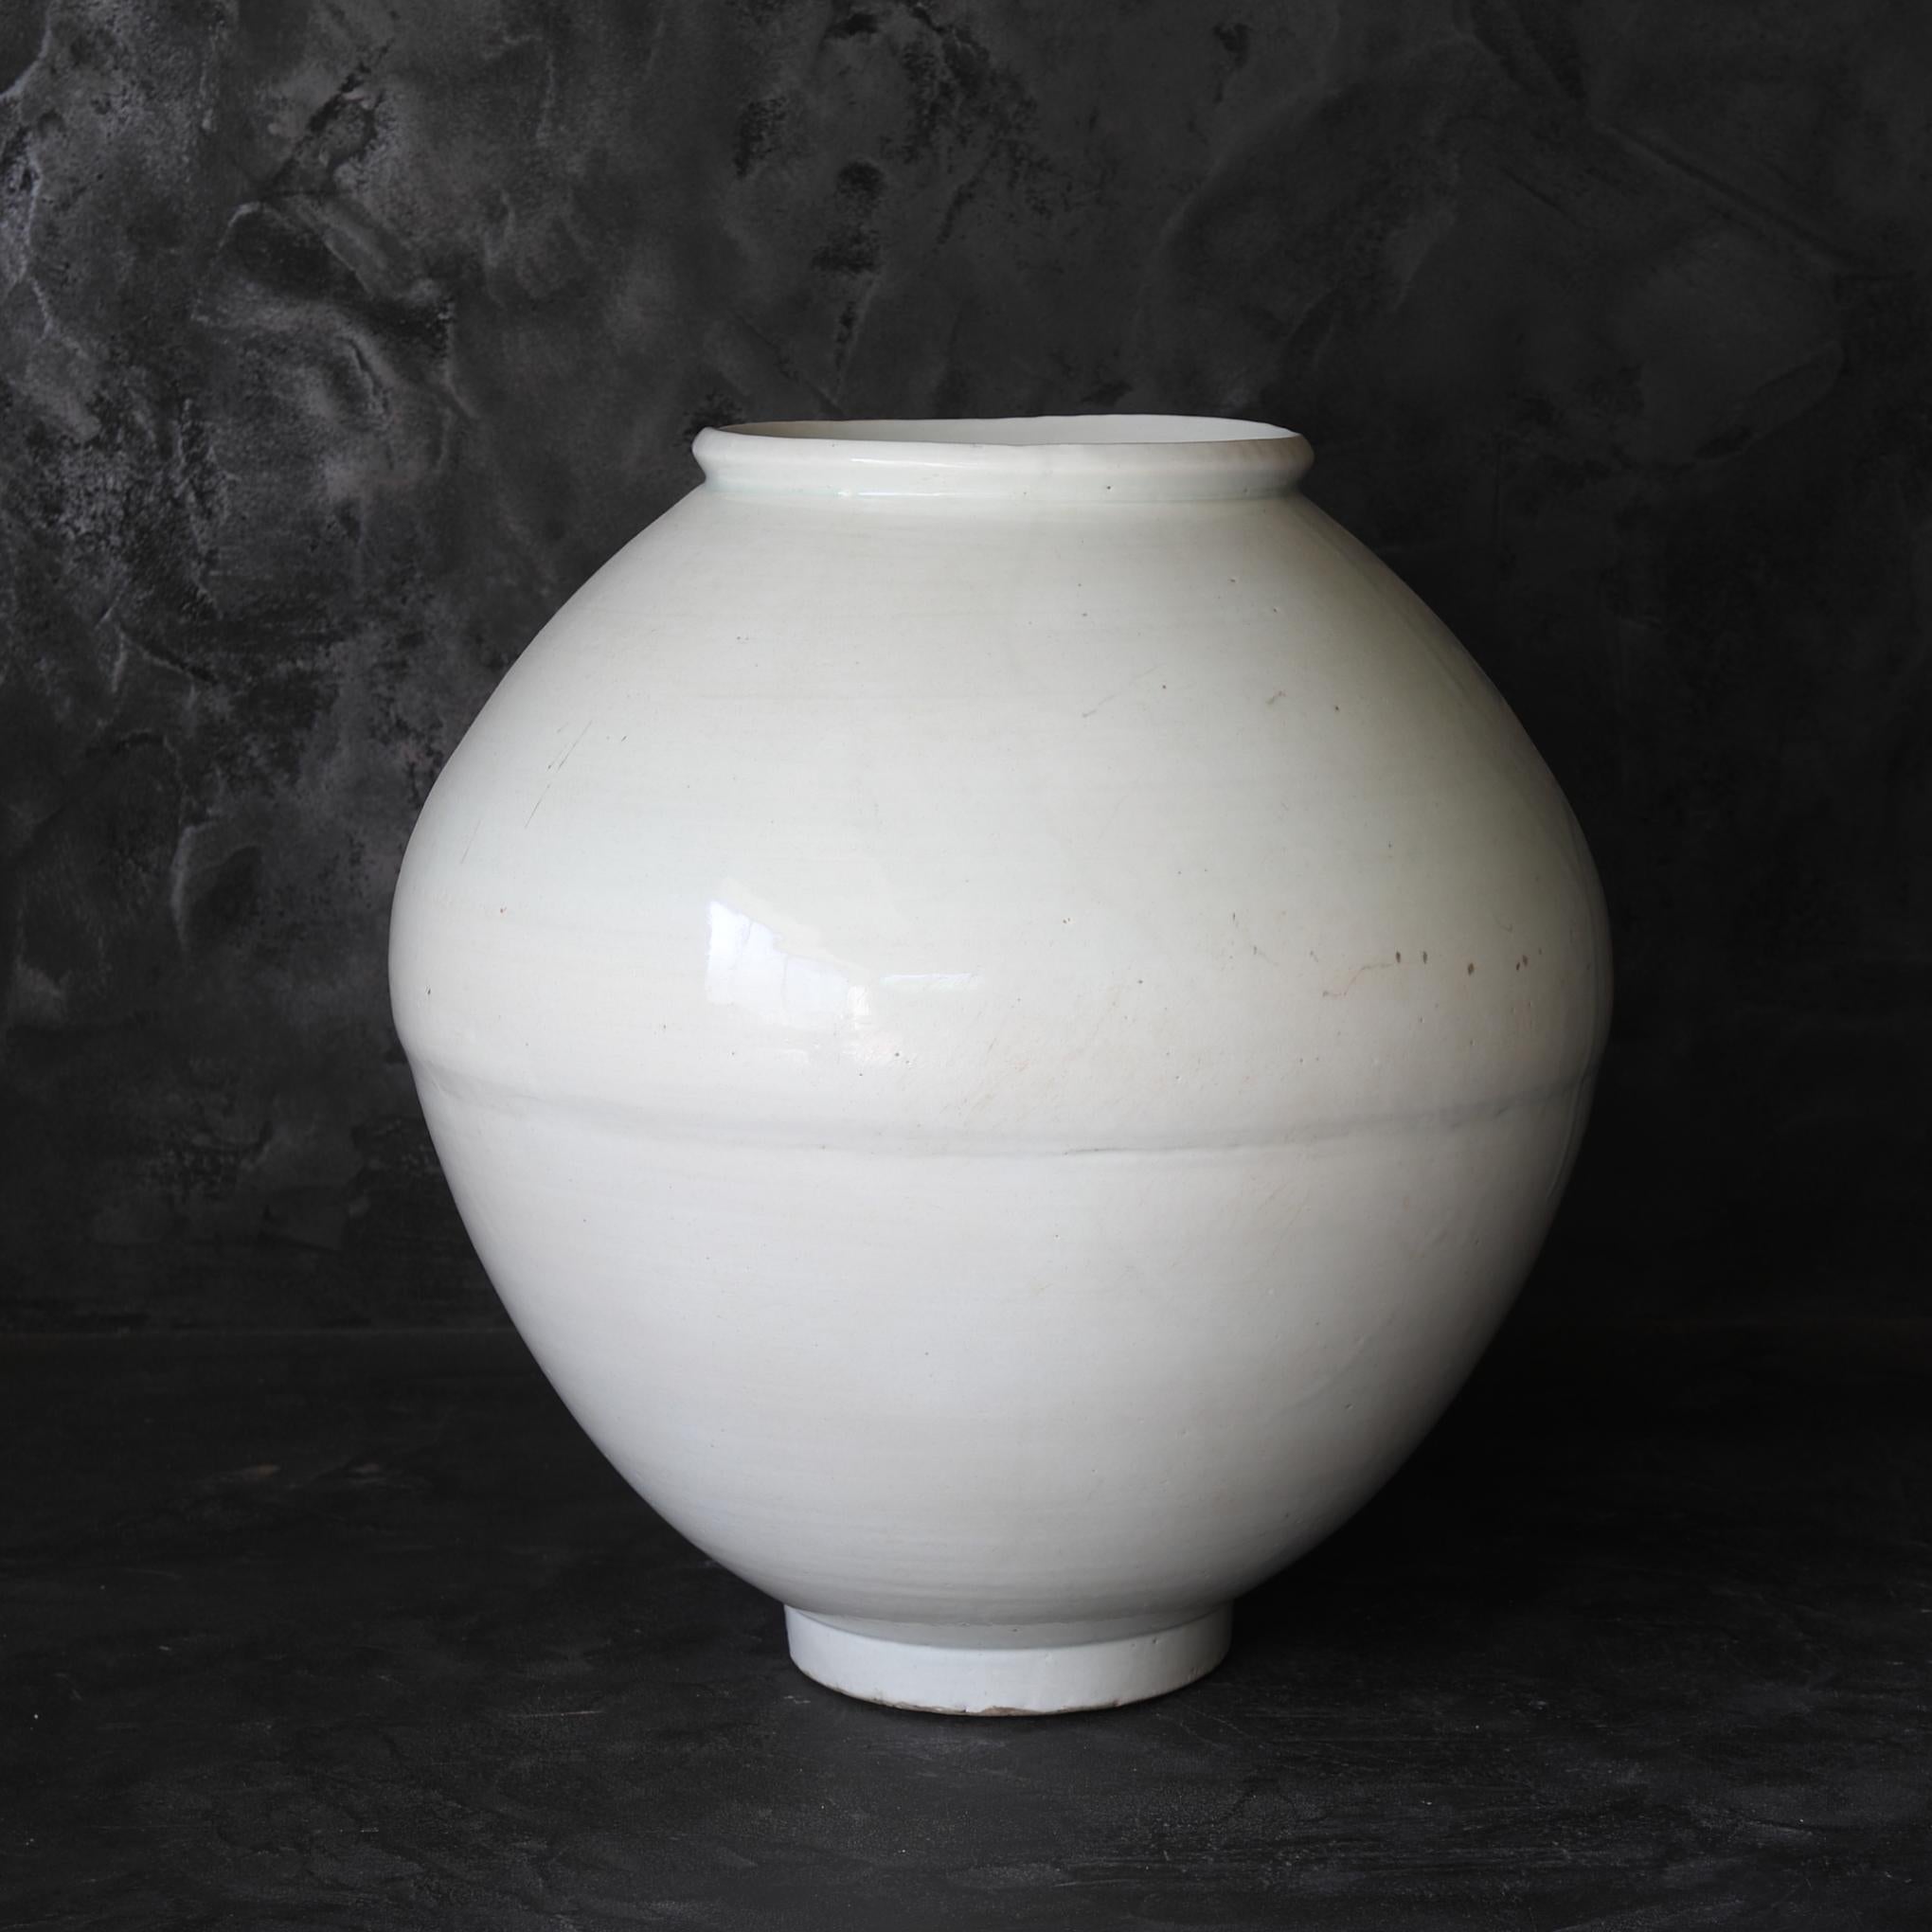 This is a white porcelain jar from the mid-Joseon period, also known as a 